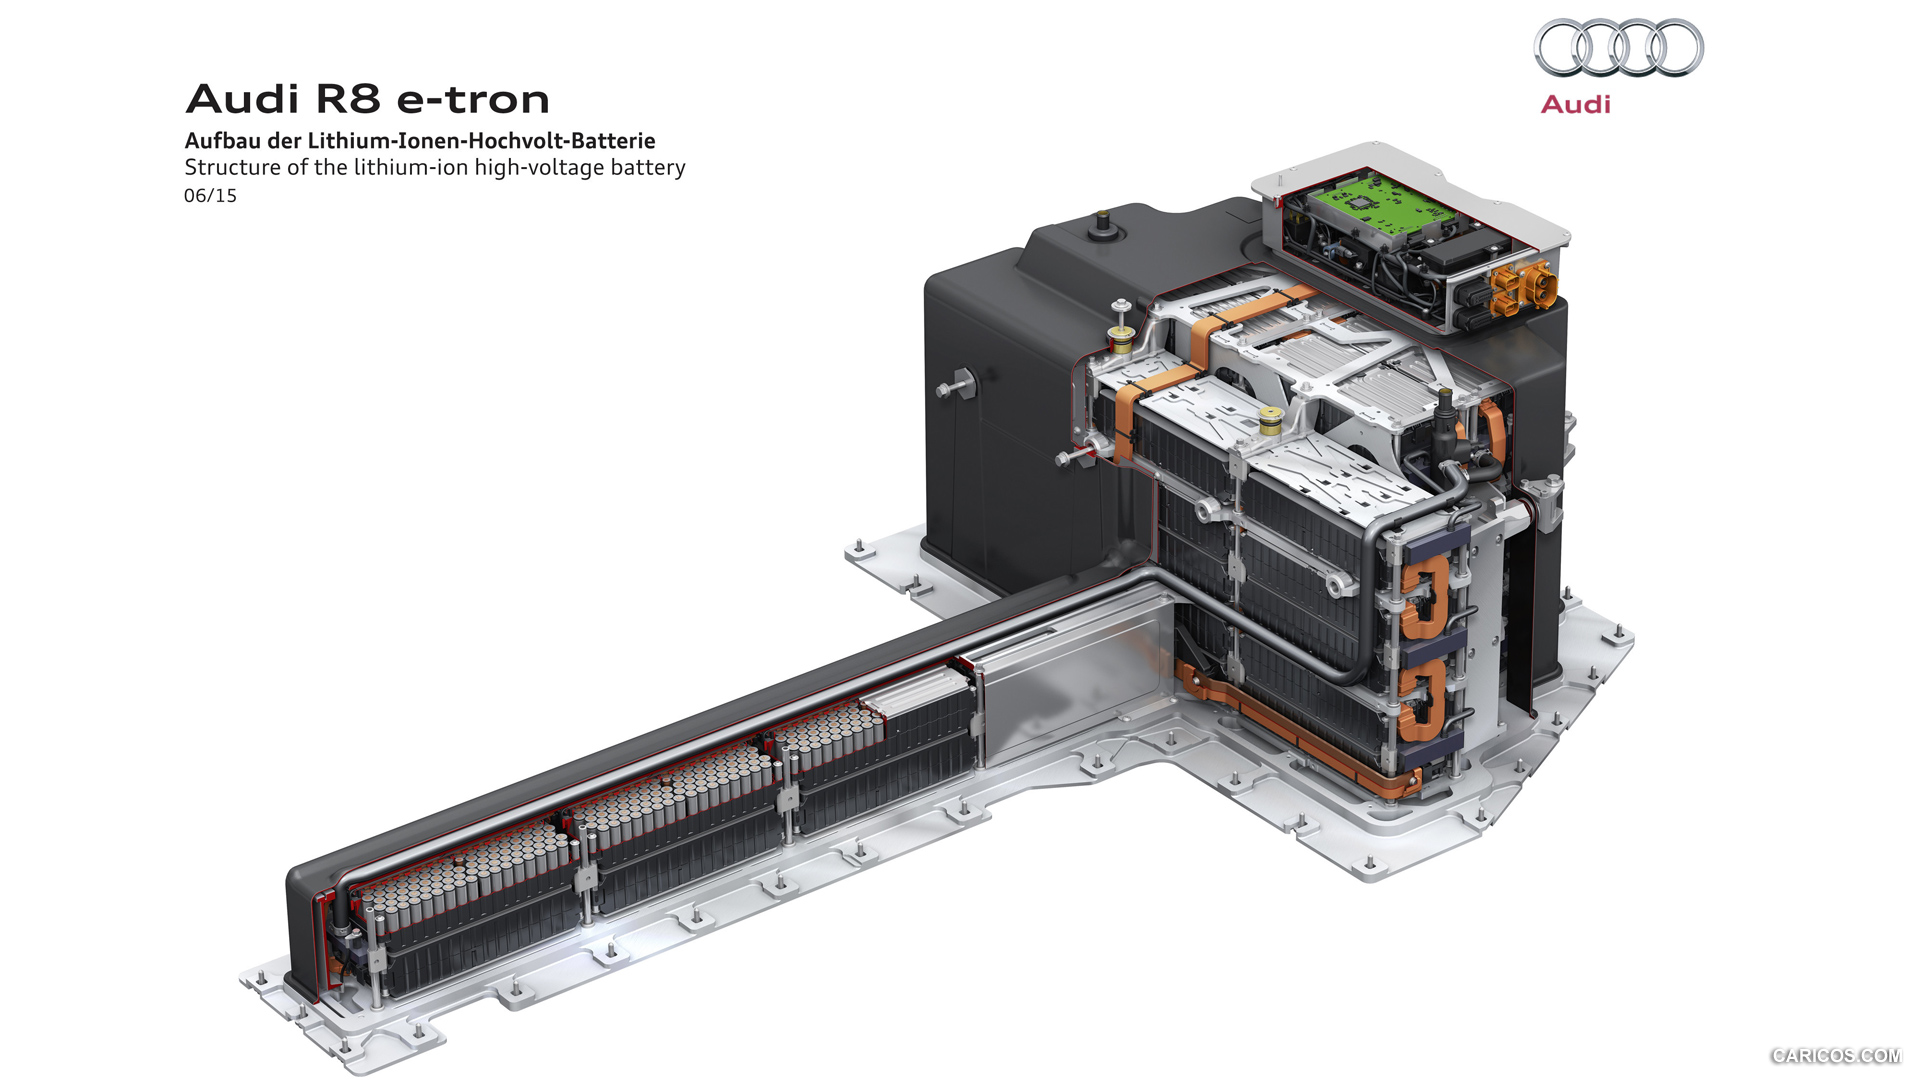 2016 Audi R8 etron  Structure of the Lithiumion HighVoltage 